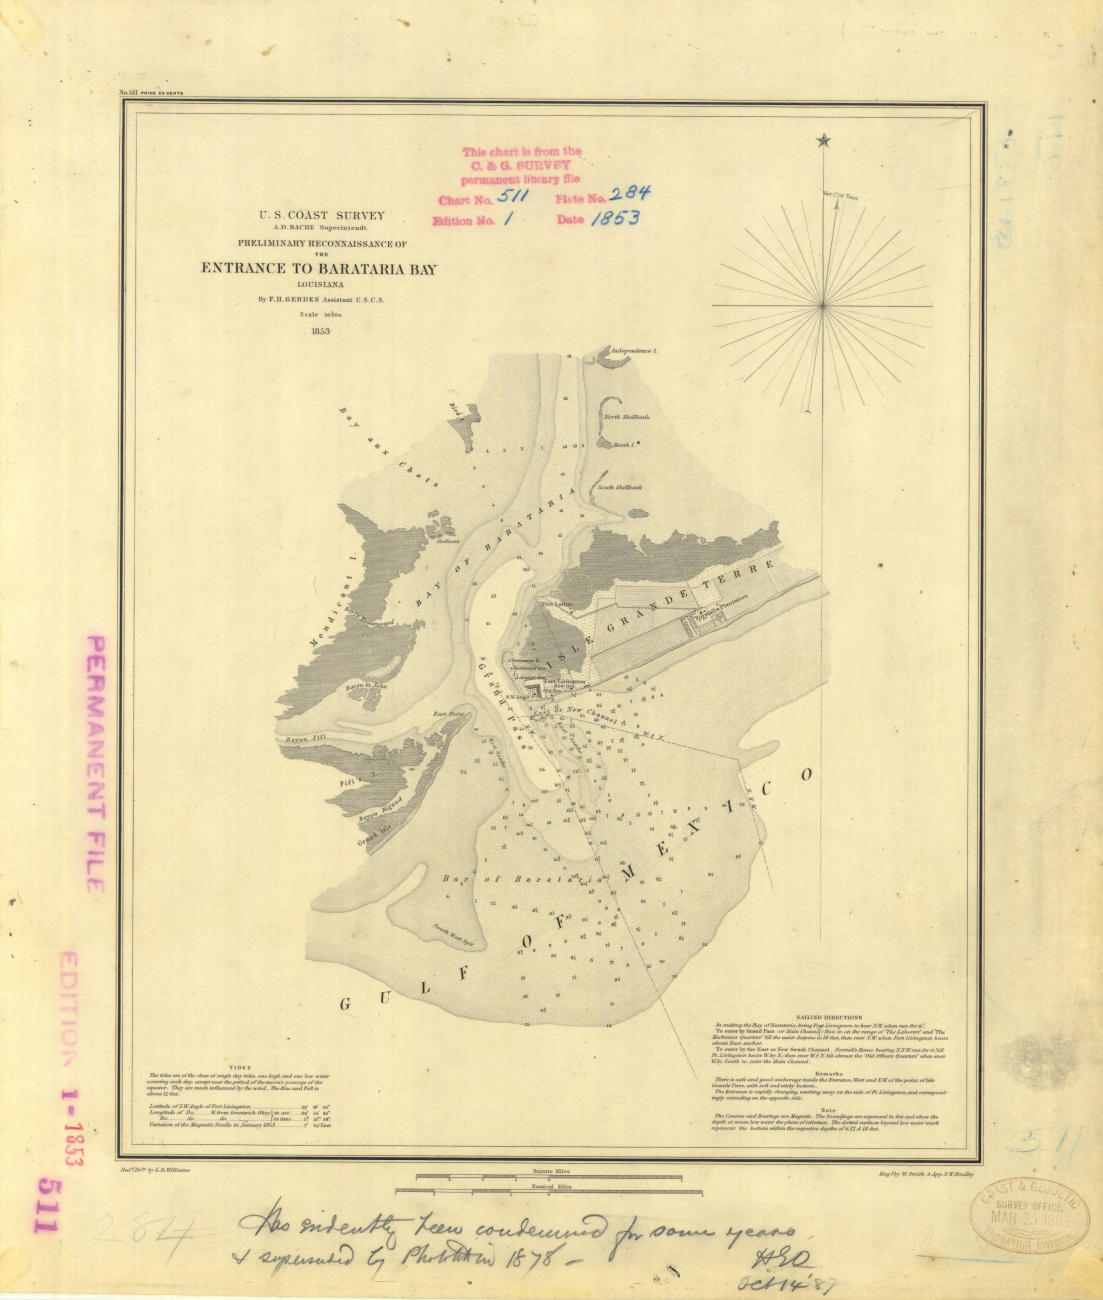 Preliminary Reconnaissance of Entrance to Barataria Bay by F